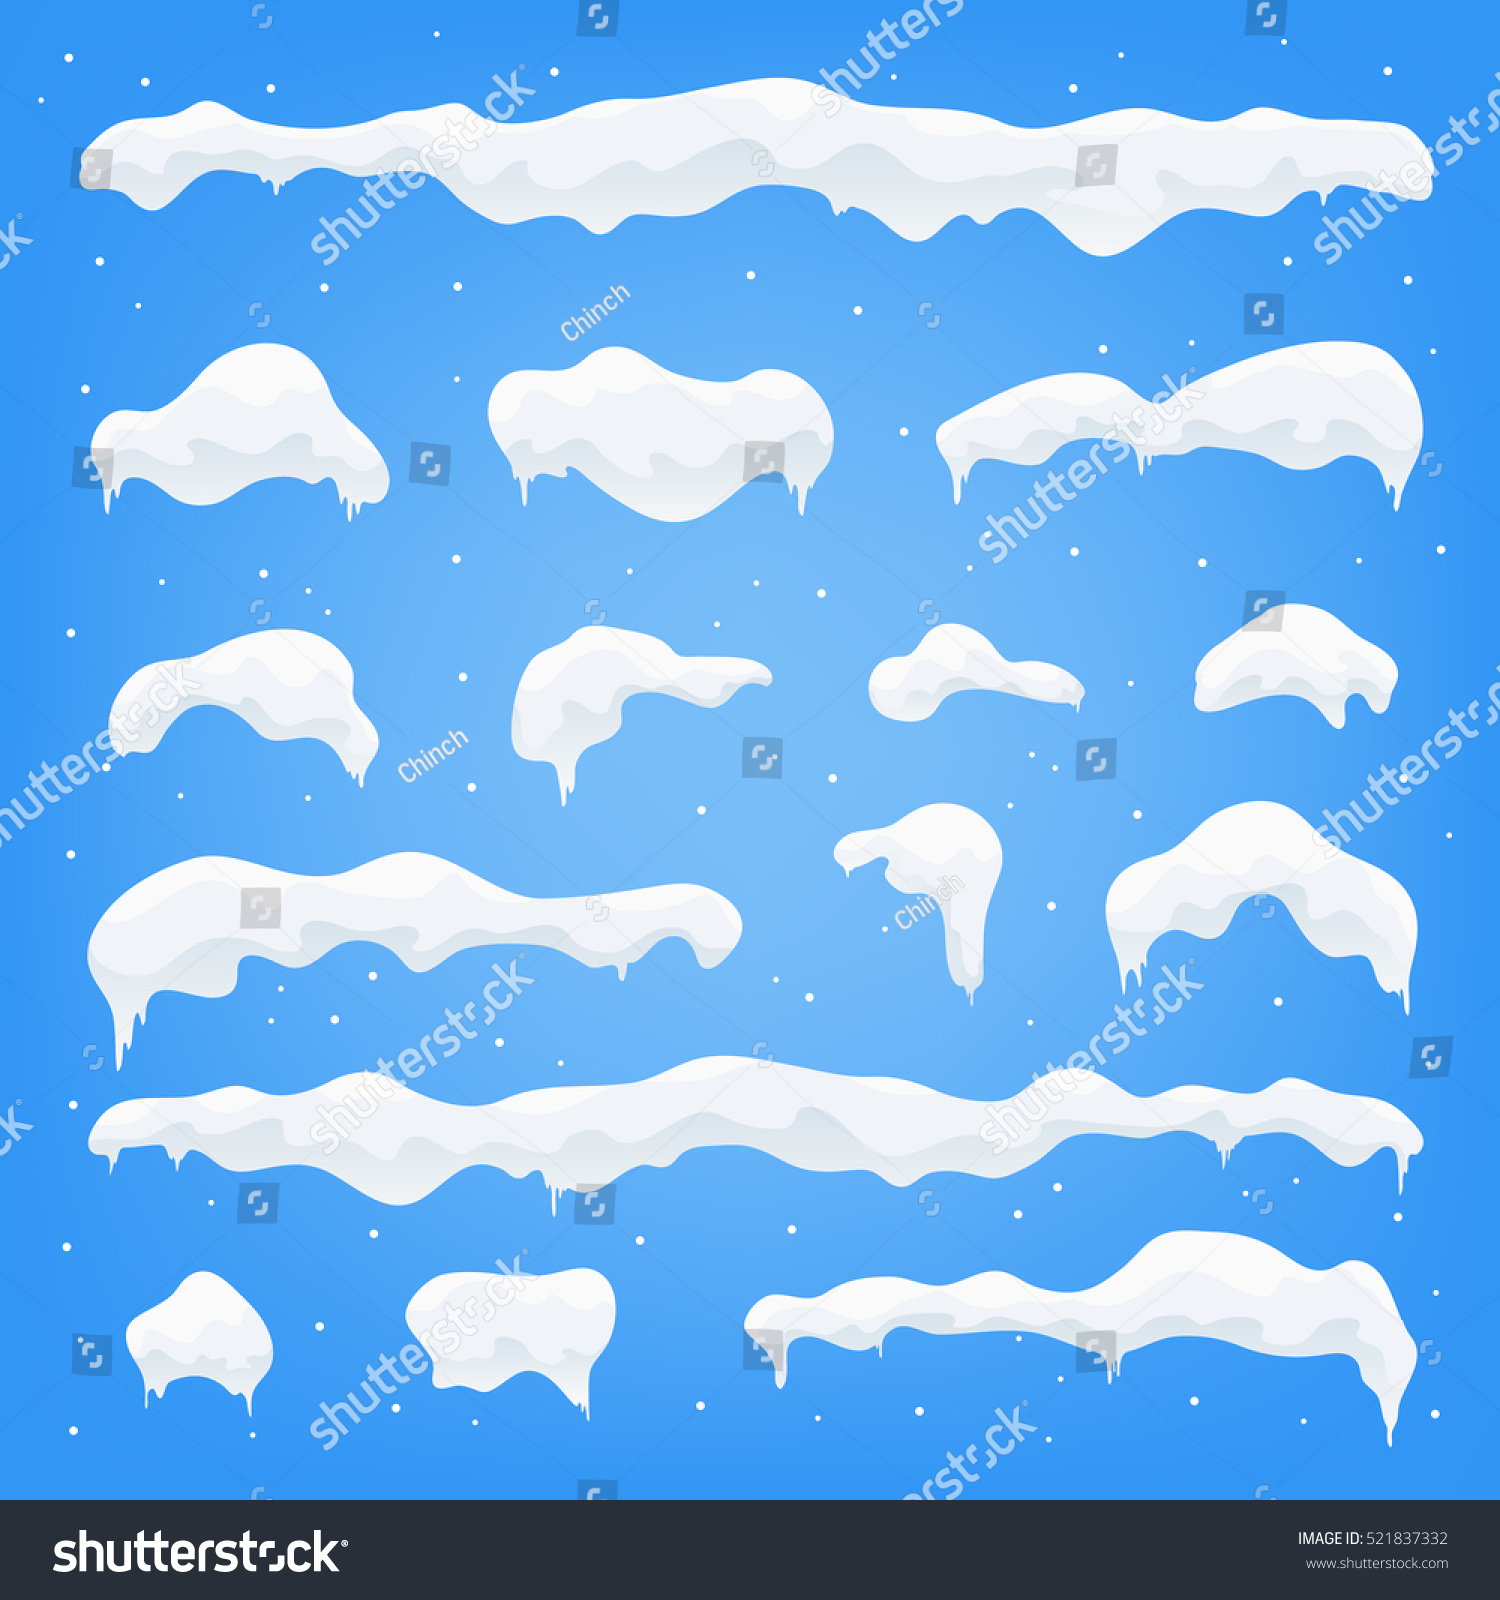 Snow caps, snowballs and snowdrifts set. Snow cap vector collection. Winter decoration element. Snowy elements on blue background. Cartoon template. Snowfall and snowflakes in motion. Illustration. #521837332